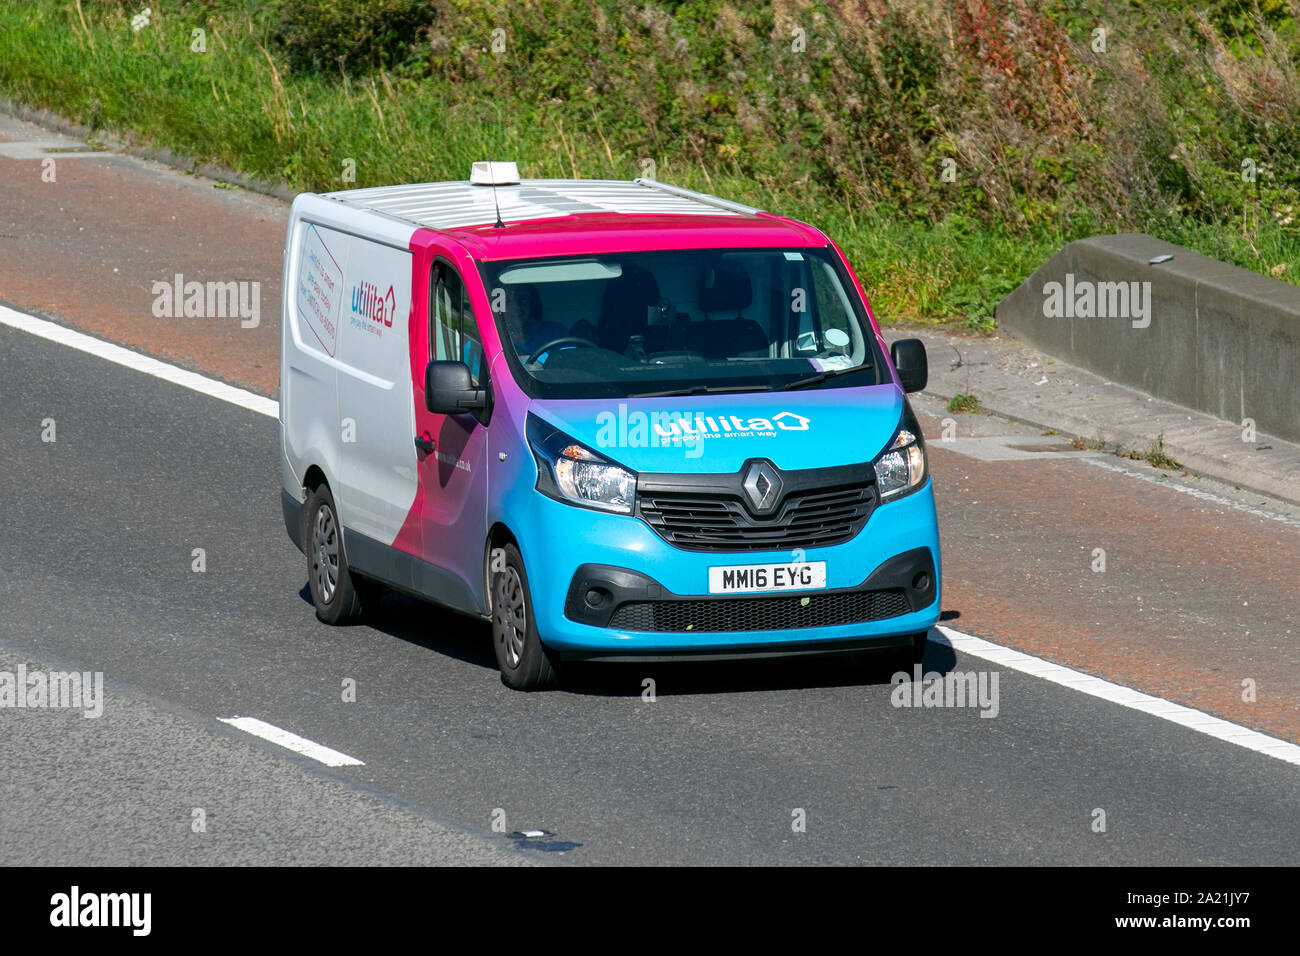 2016 Renault Trafic Sl27 Business+ NRG; Utilita vehicle travelling on the M6 at Lancaster, Stock Photo